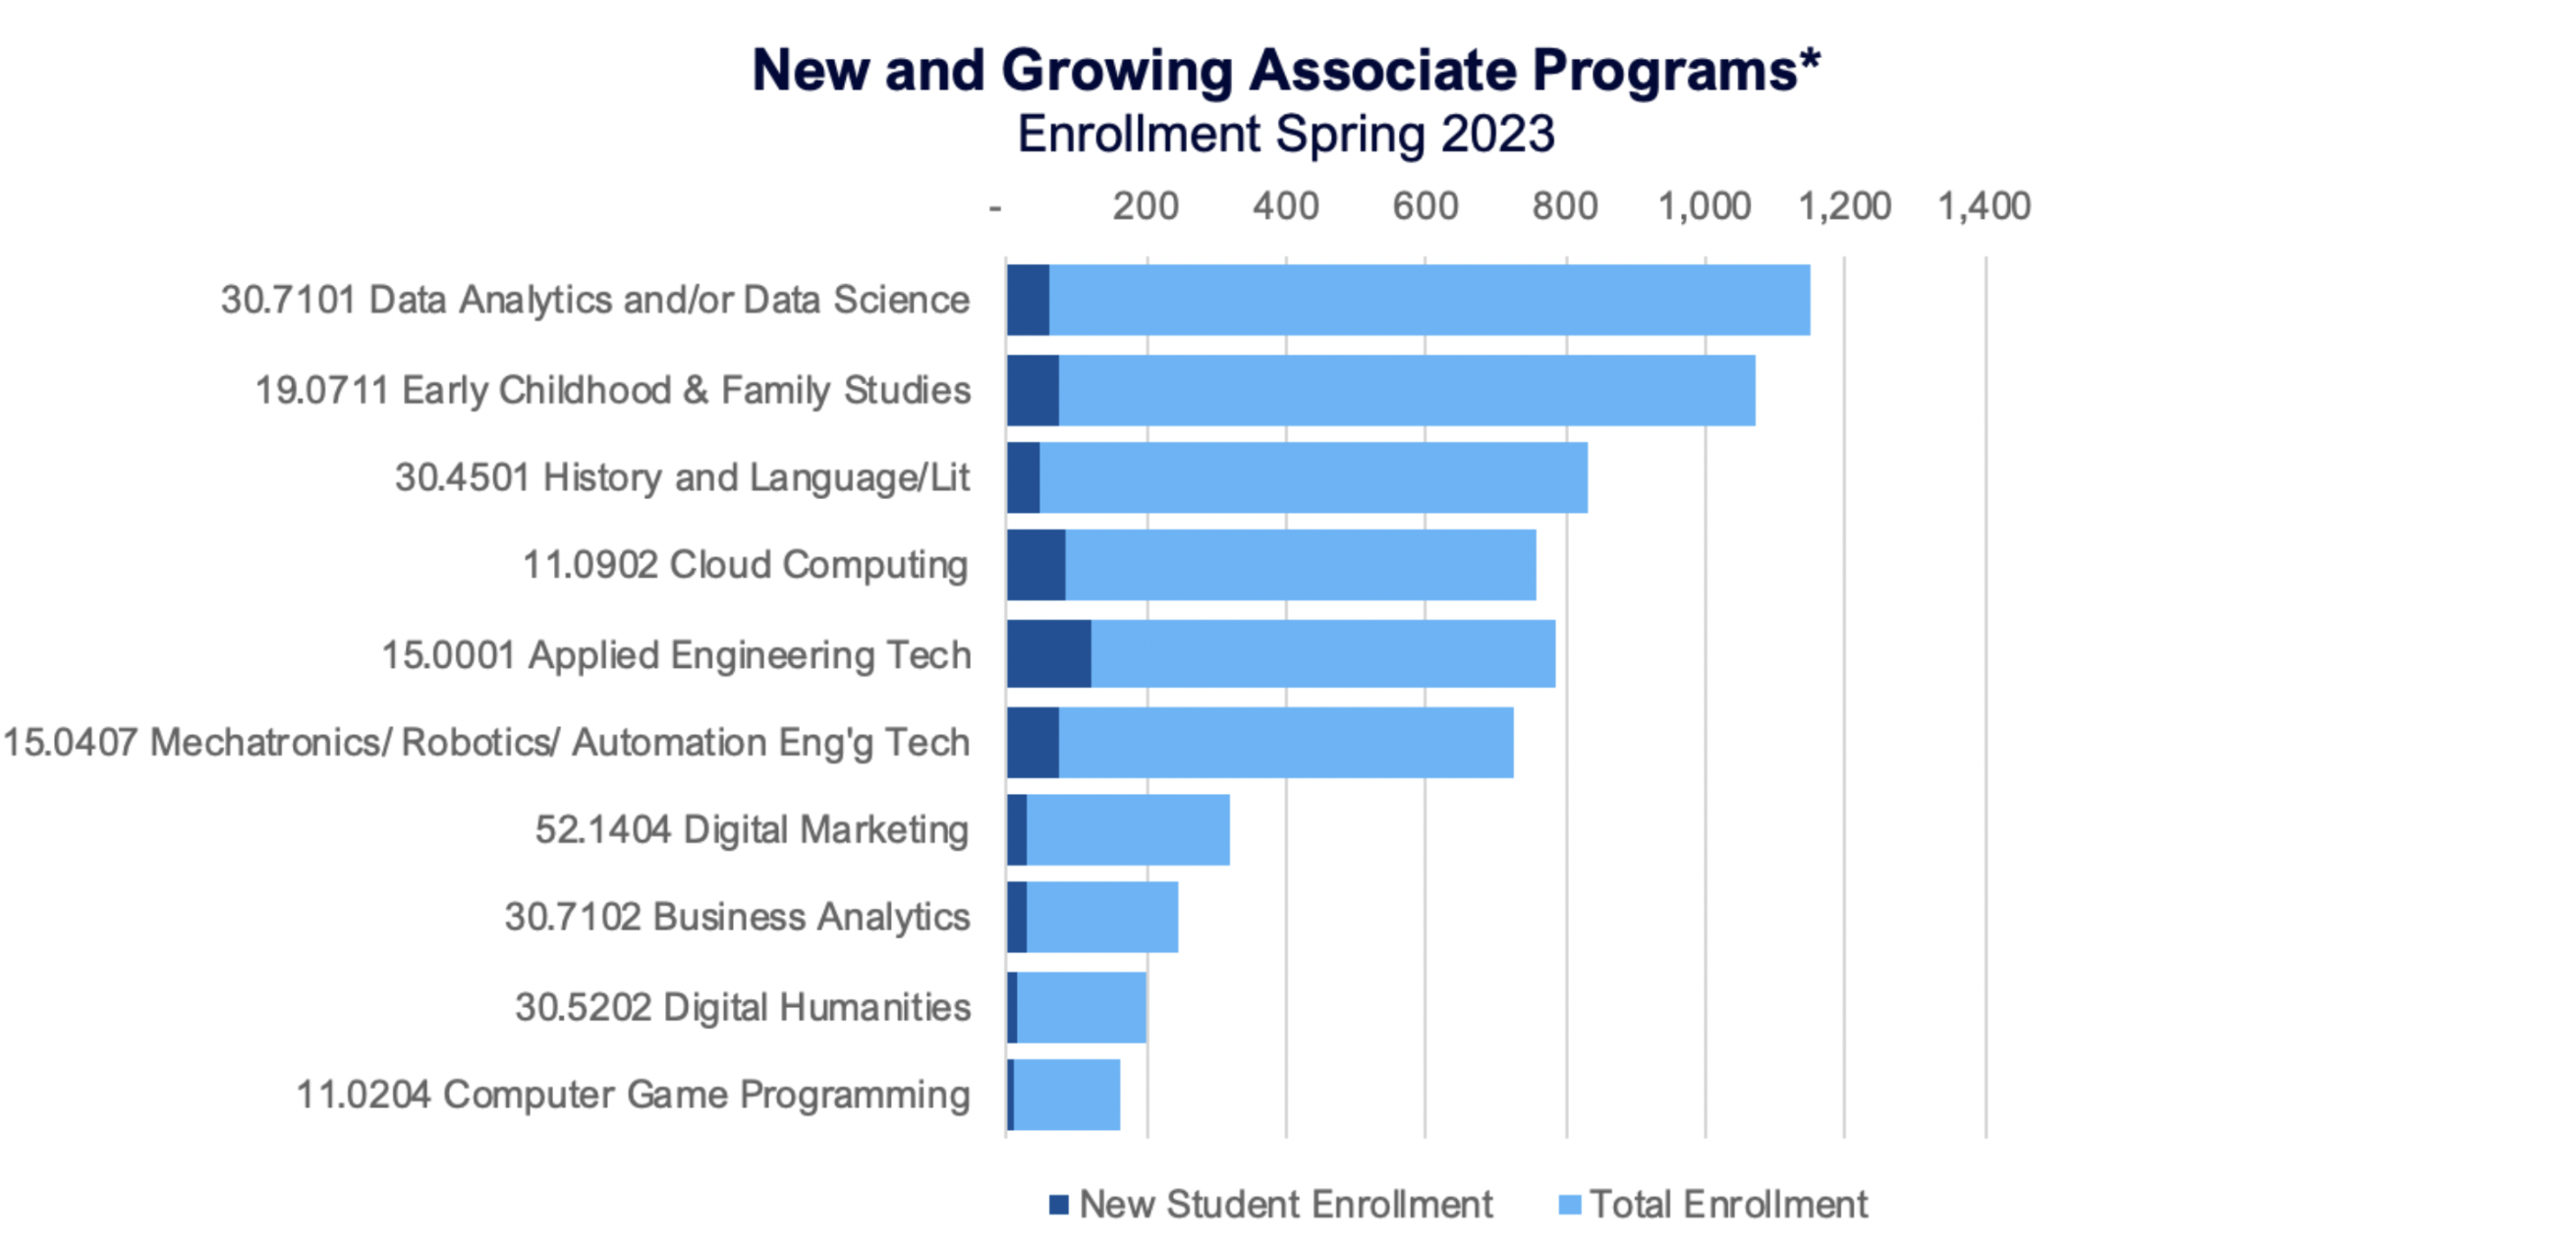 New and growing Associate Programs* (Enrollment Spring 2023)